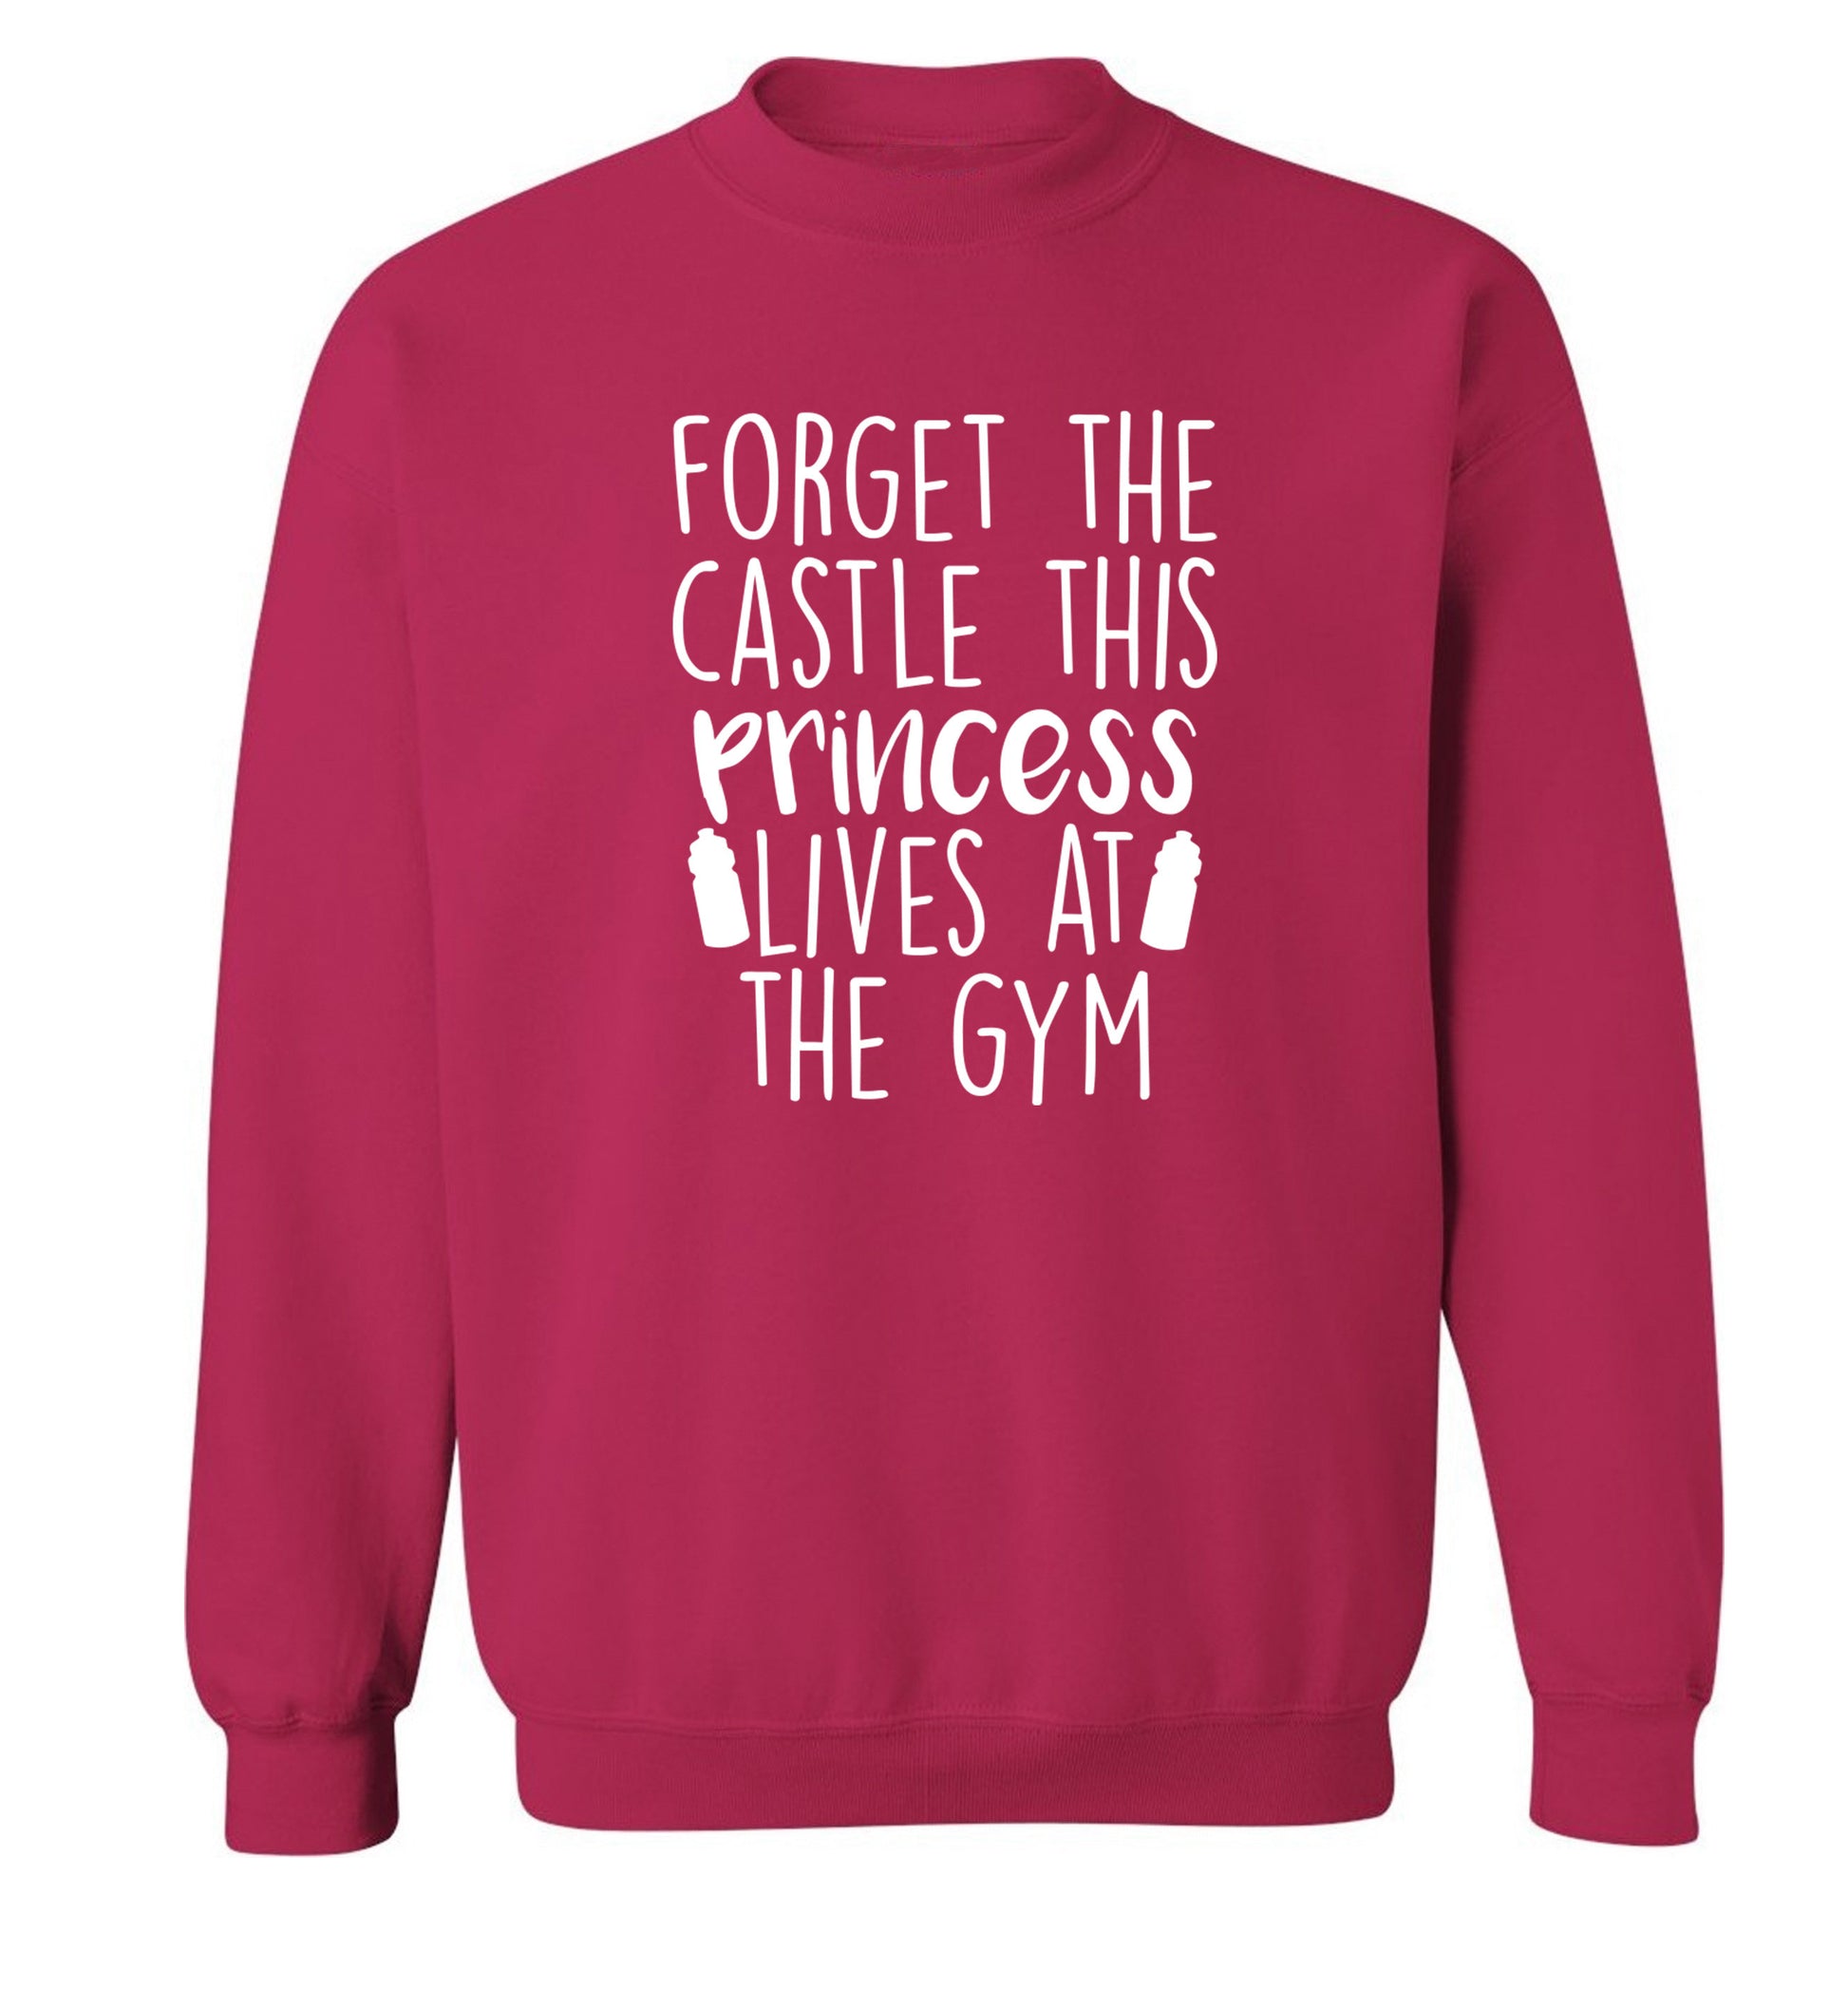 Forget the castle this princess lives at the gym Adult's unisex pink Sweater 2XL